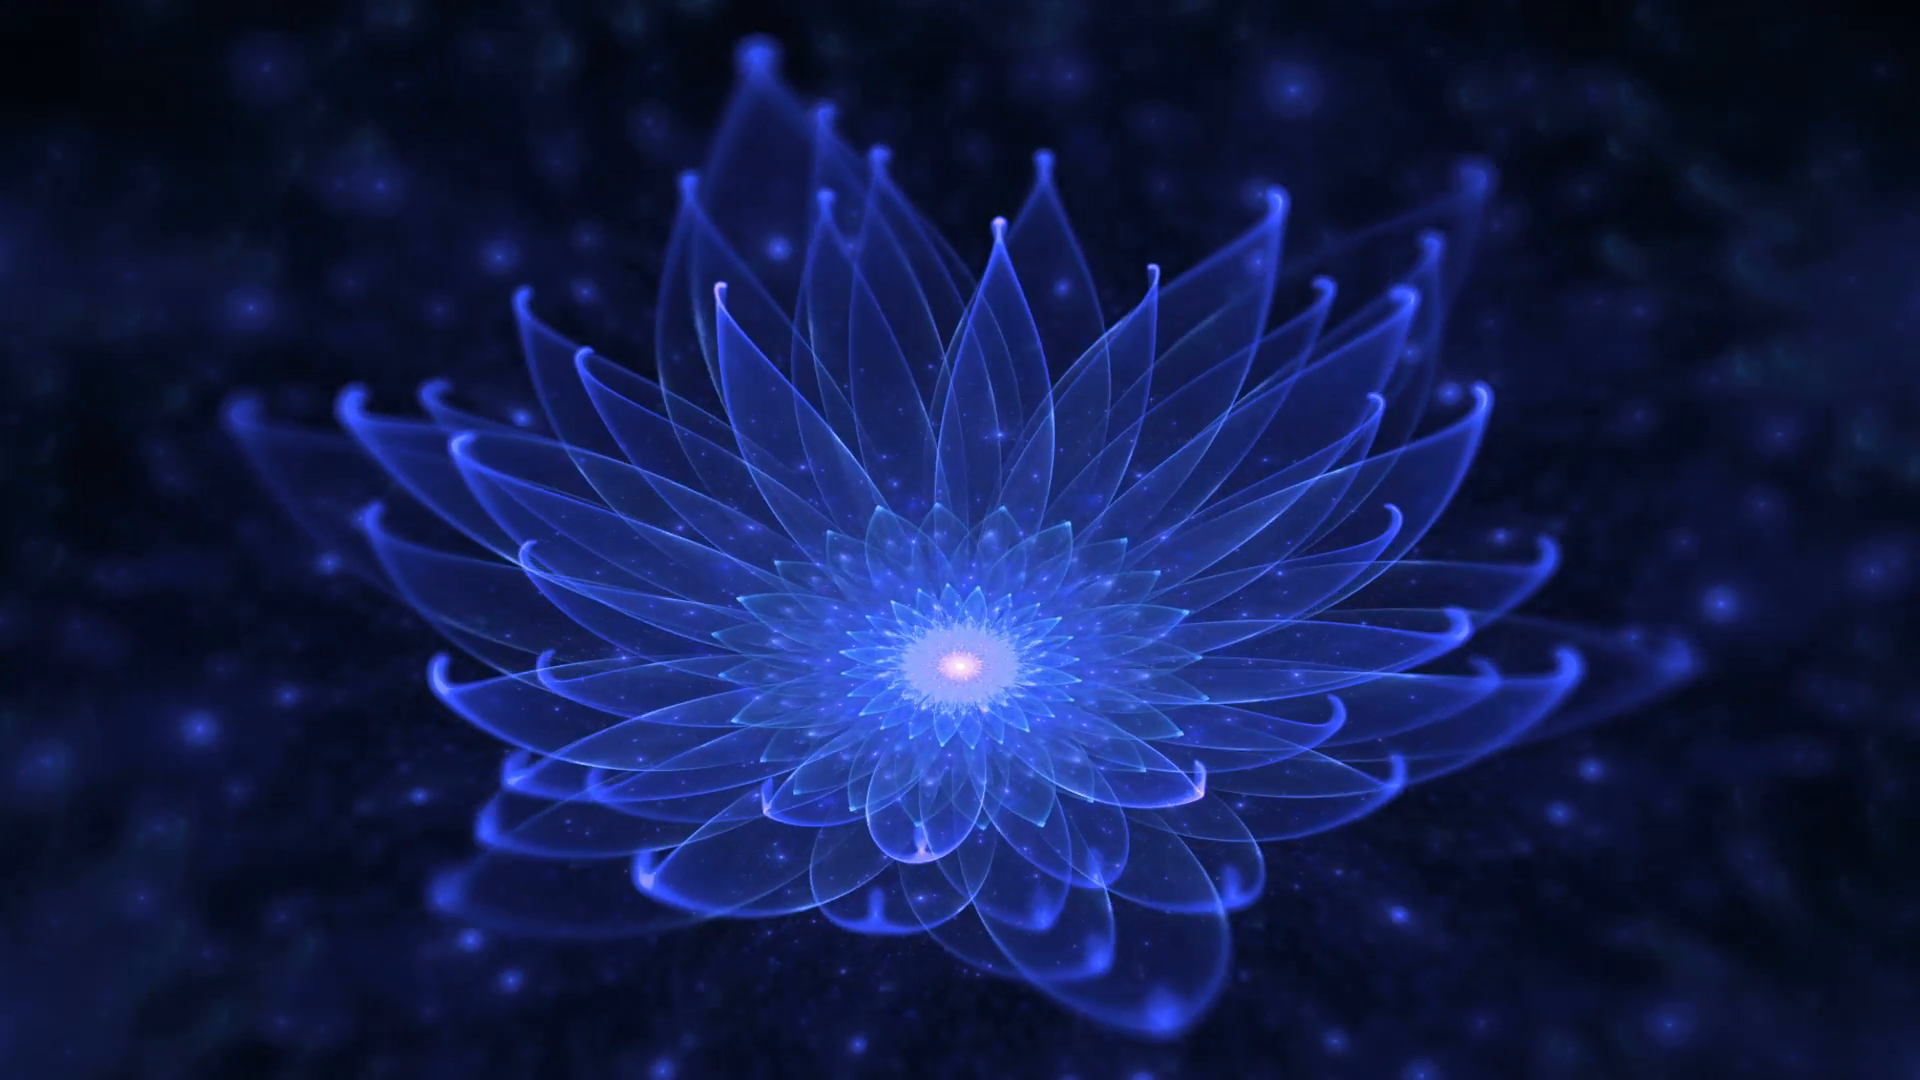 Glowing Blue Lotus, Water Lily, Enlightenment or Meditation, Magic ...